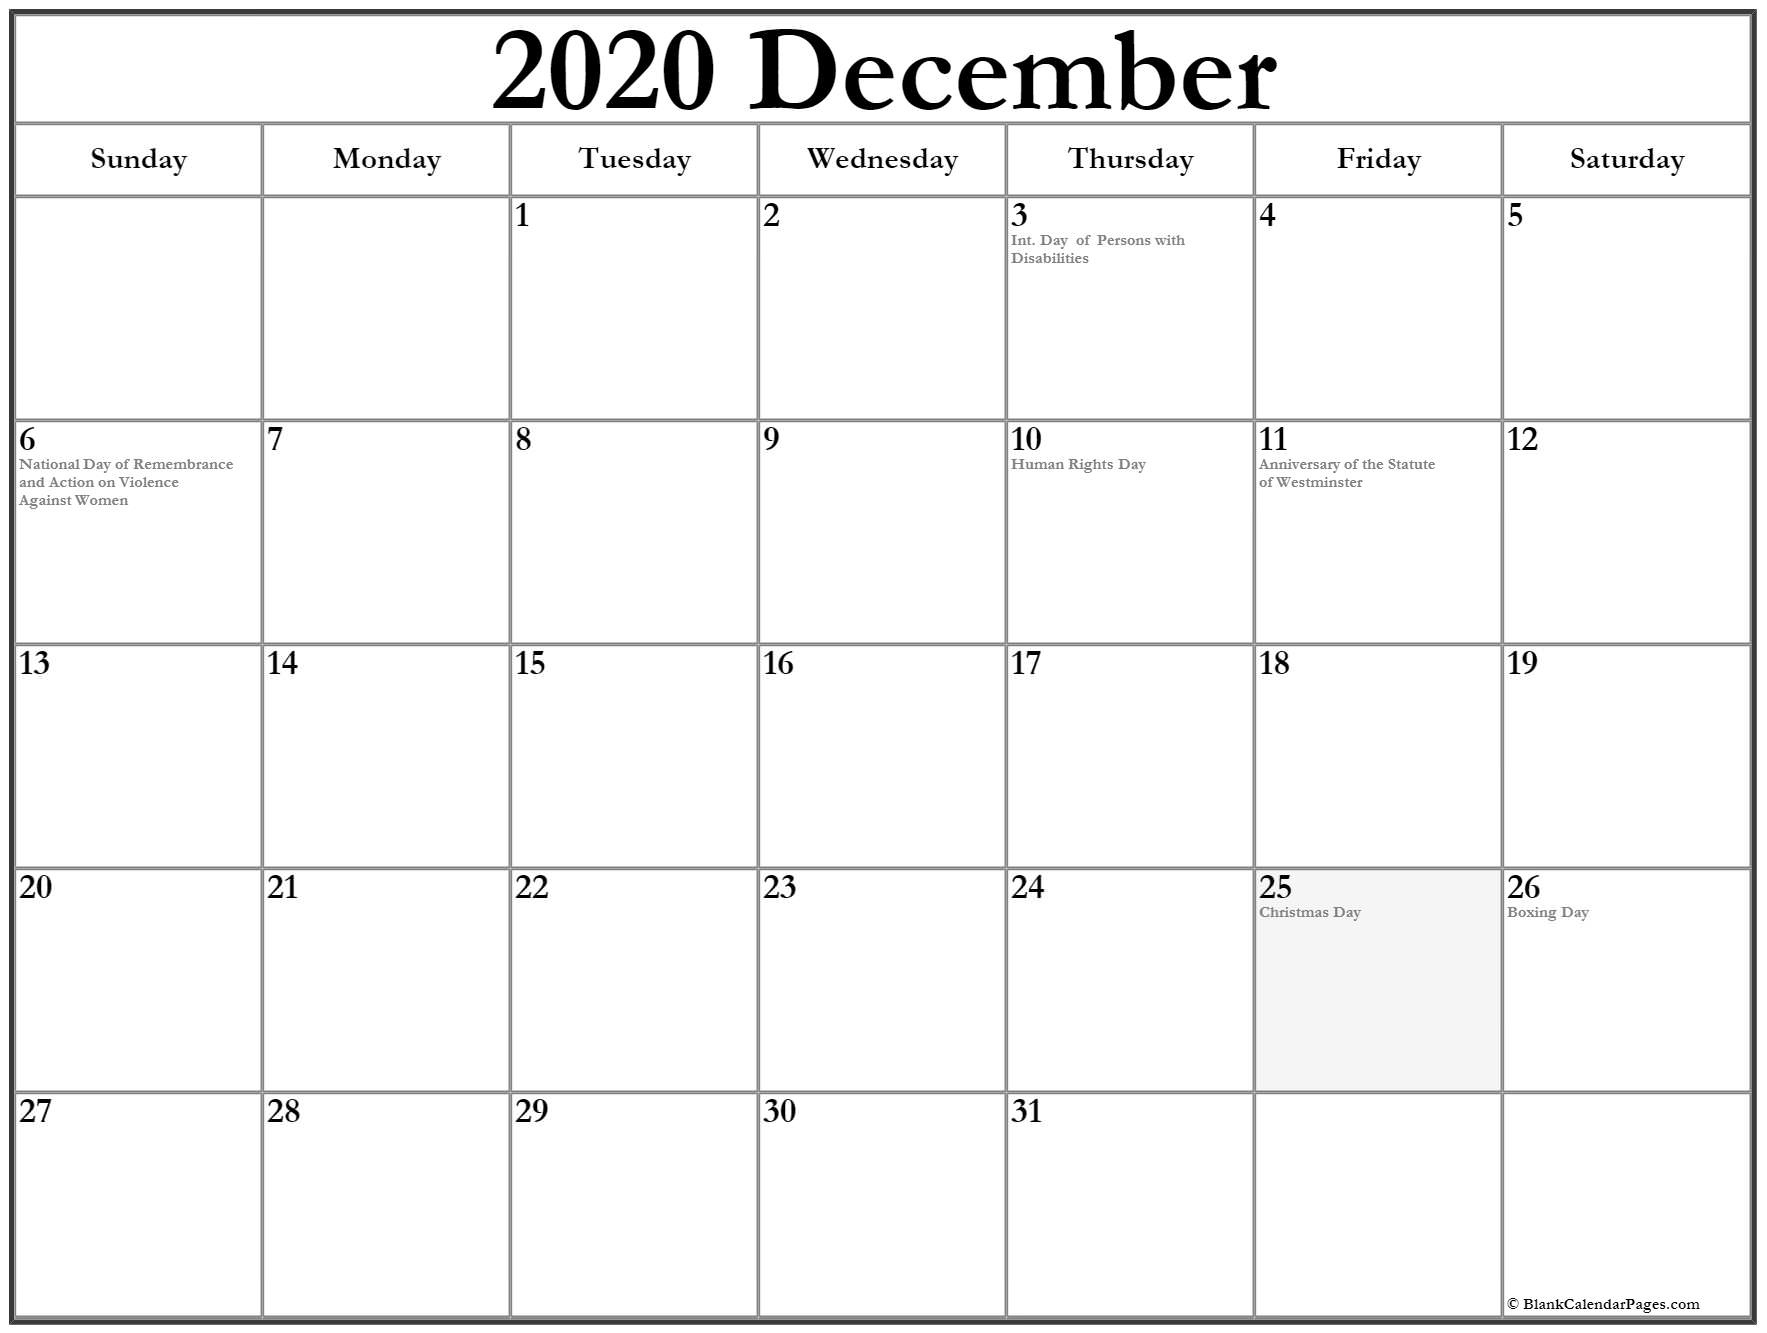 Collection Of December 2020 Calendars With Holidays Incredible December 2020 Calendar Boxing Day